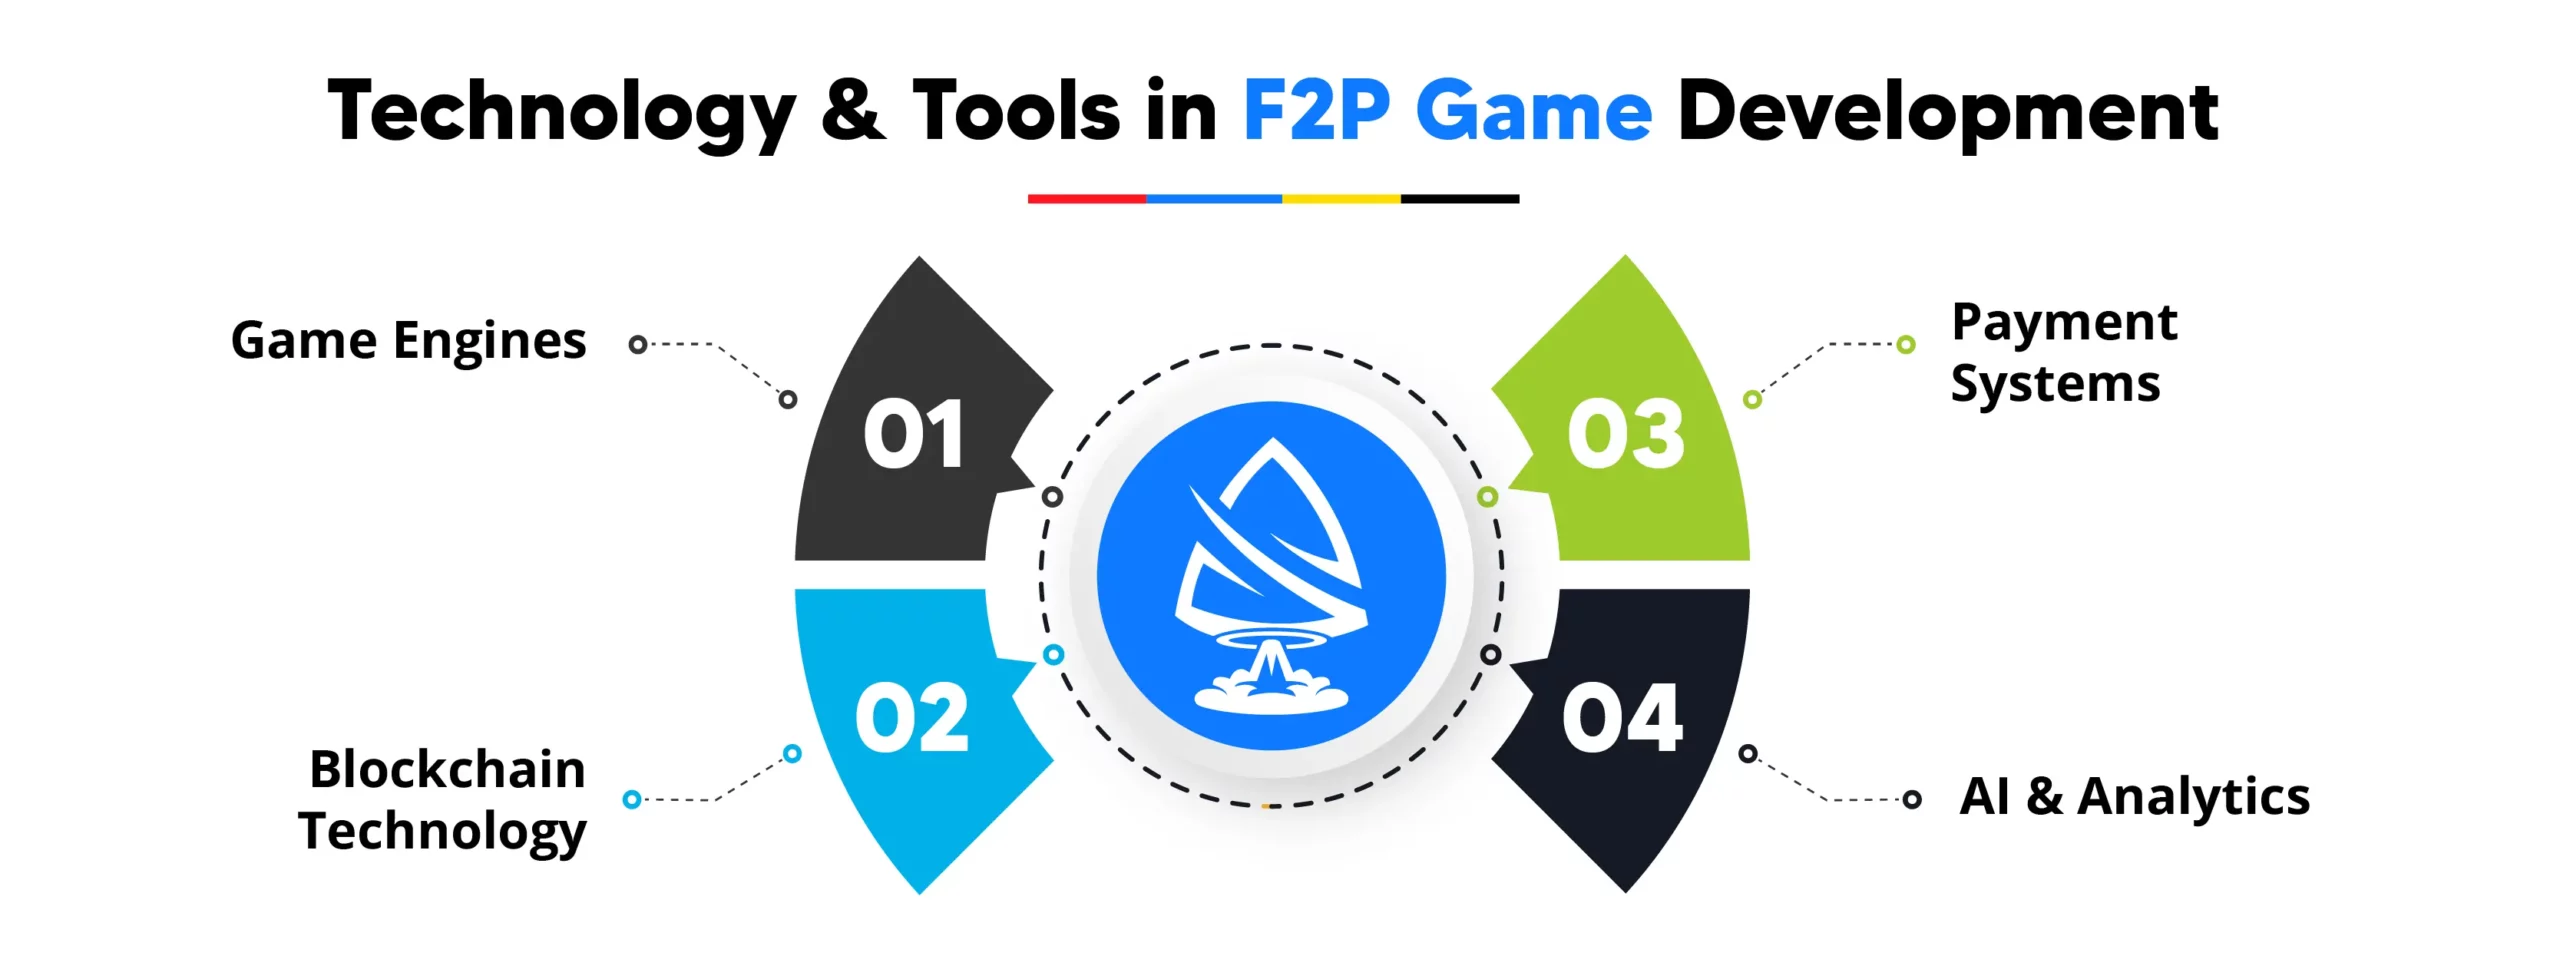 Technology and Tools in F2P Game Development